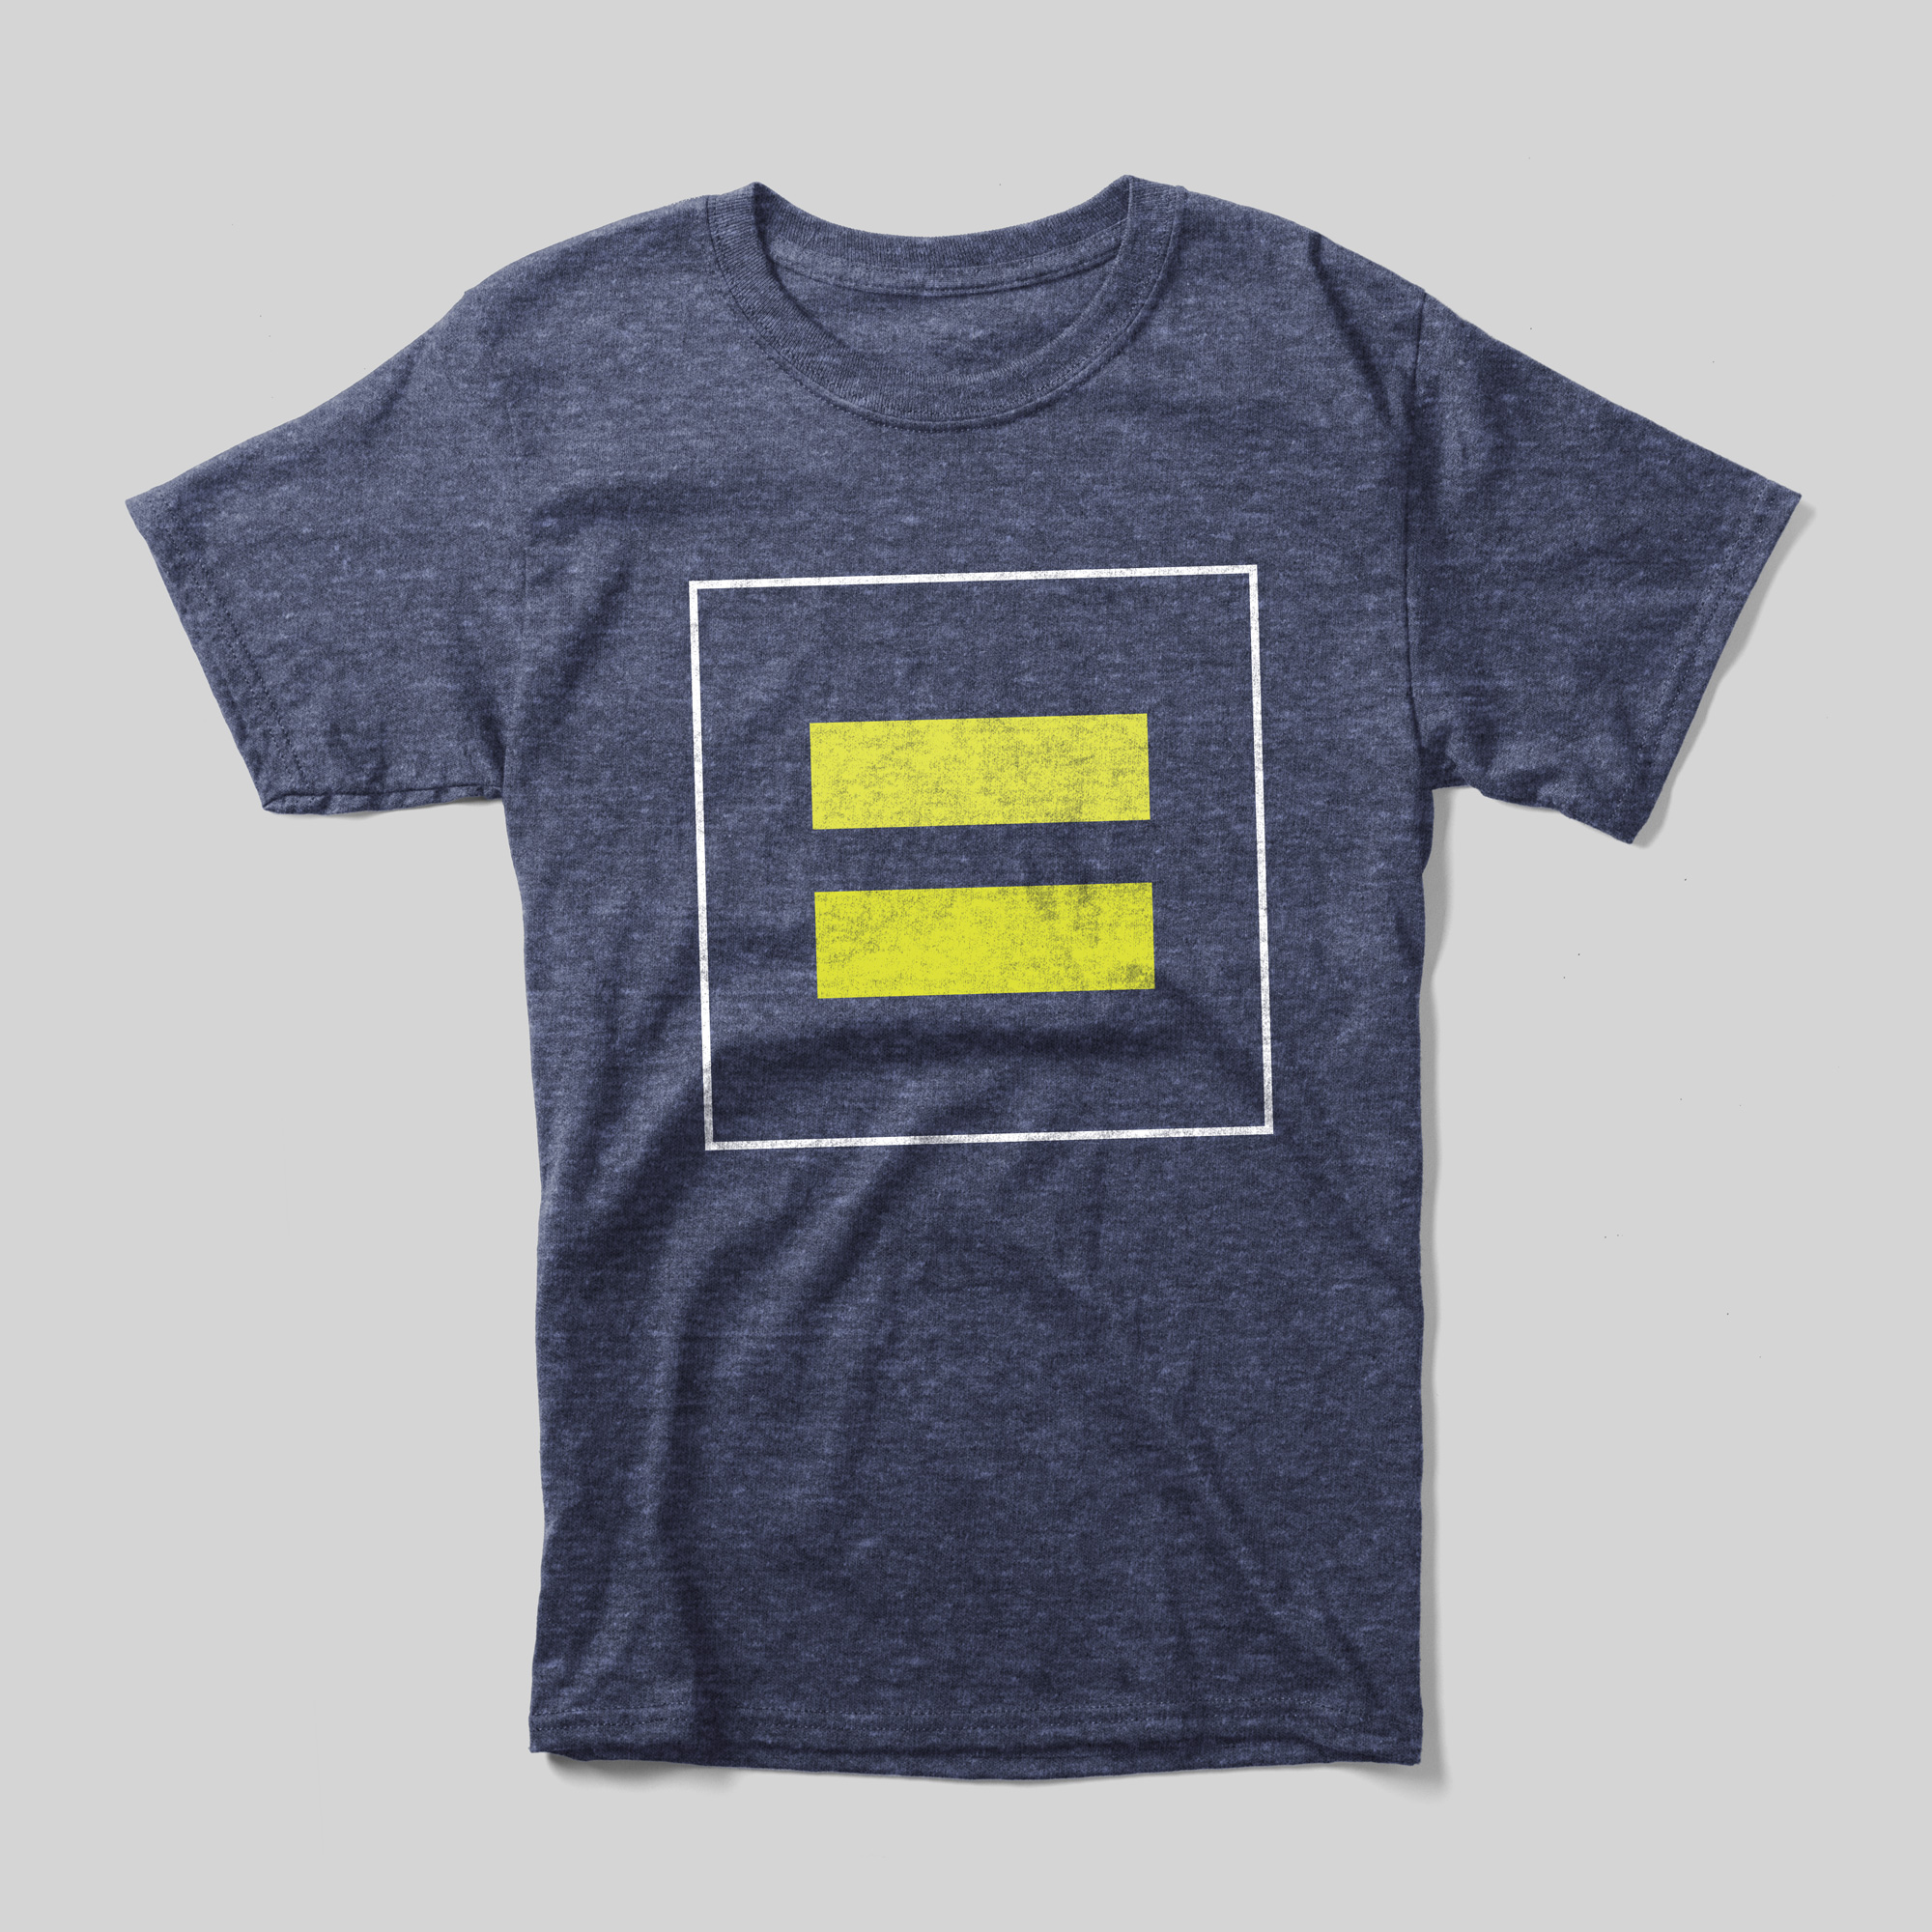 A heather blue t-shirt with the Human Rights Campaign Equality logo (a yellow equals sign inside of a white-lined square).